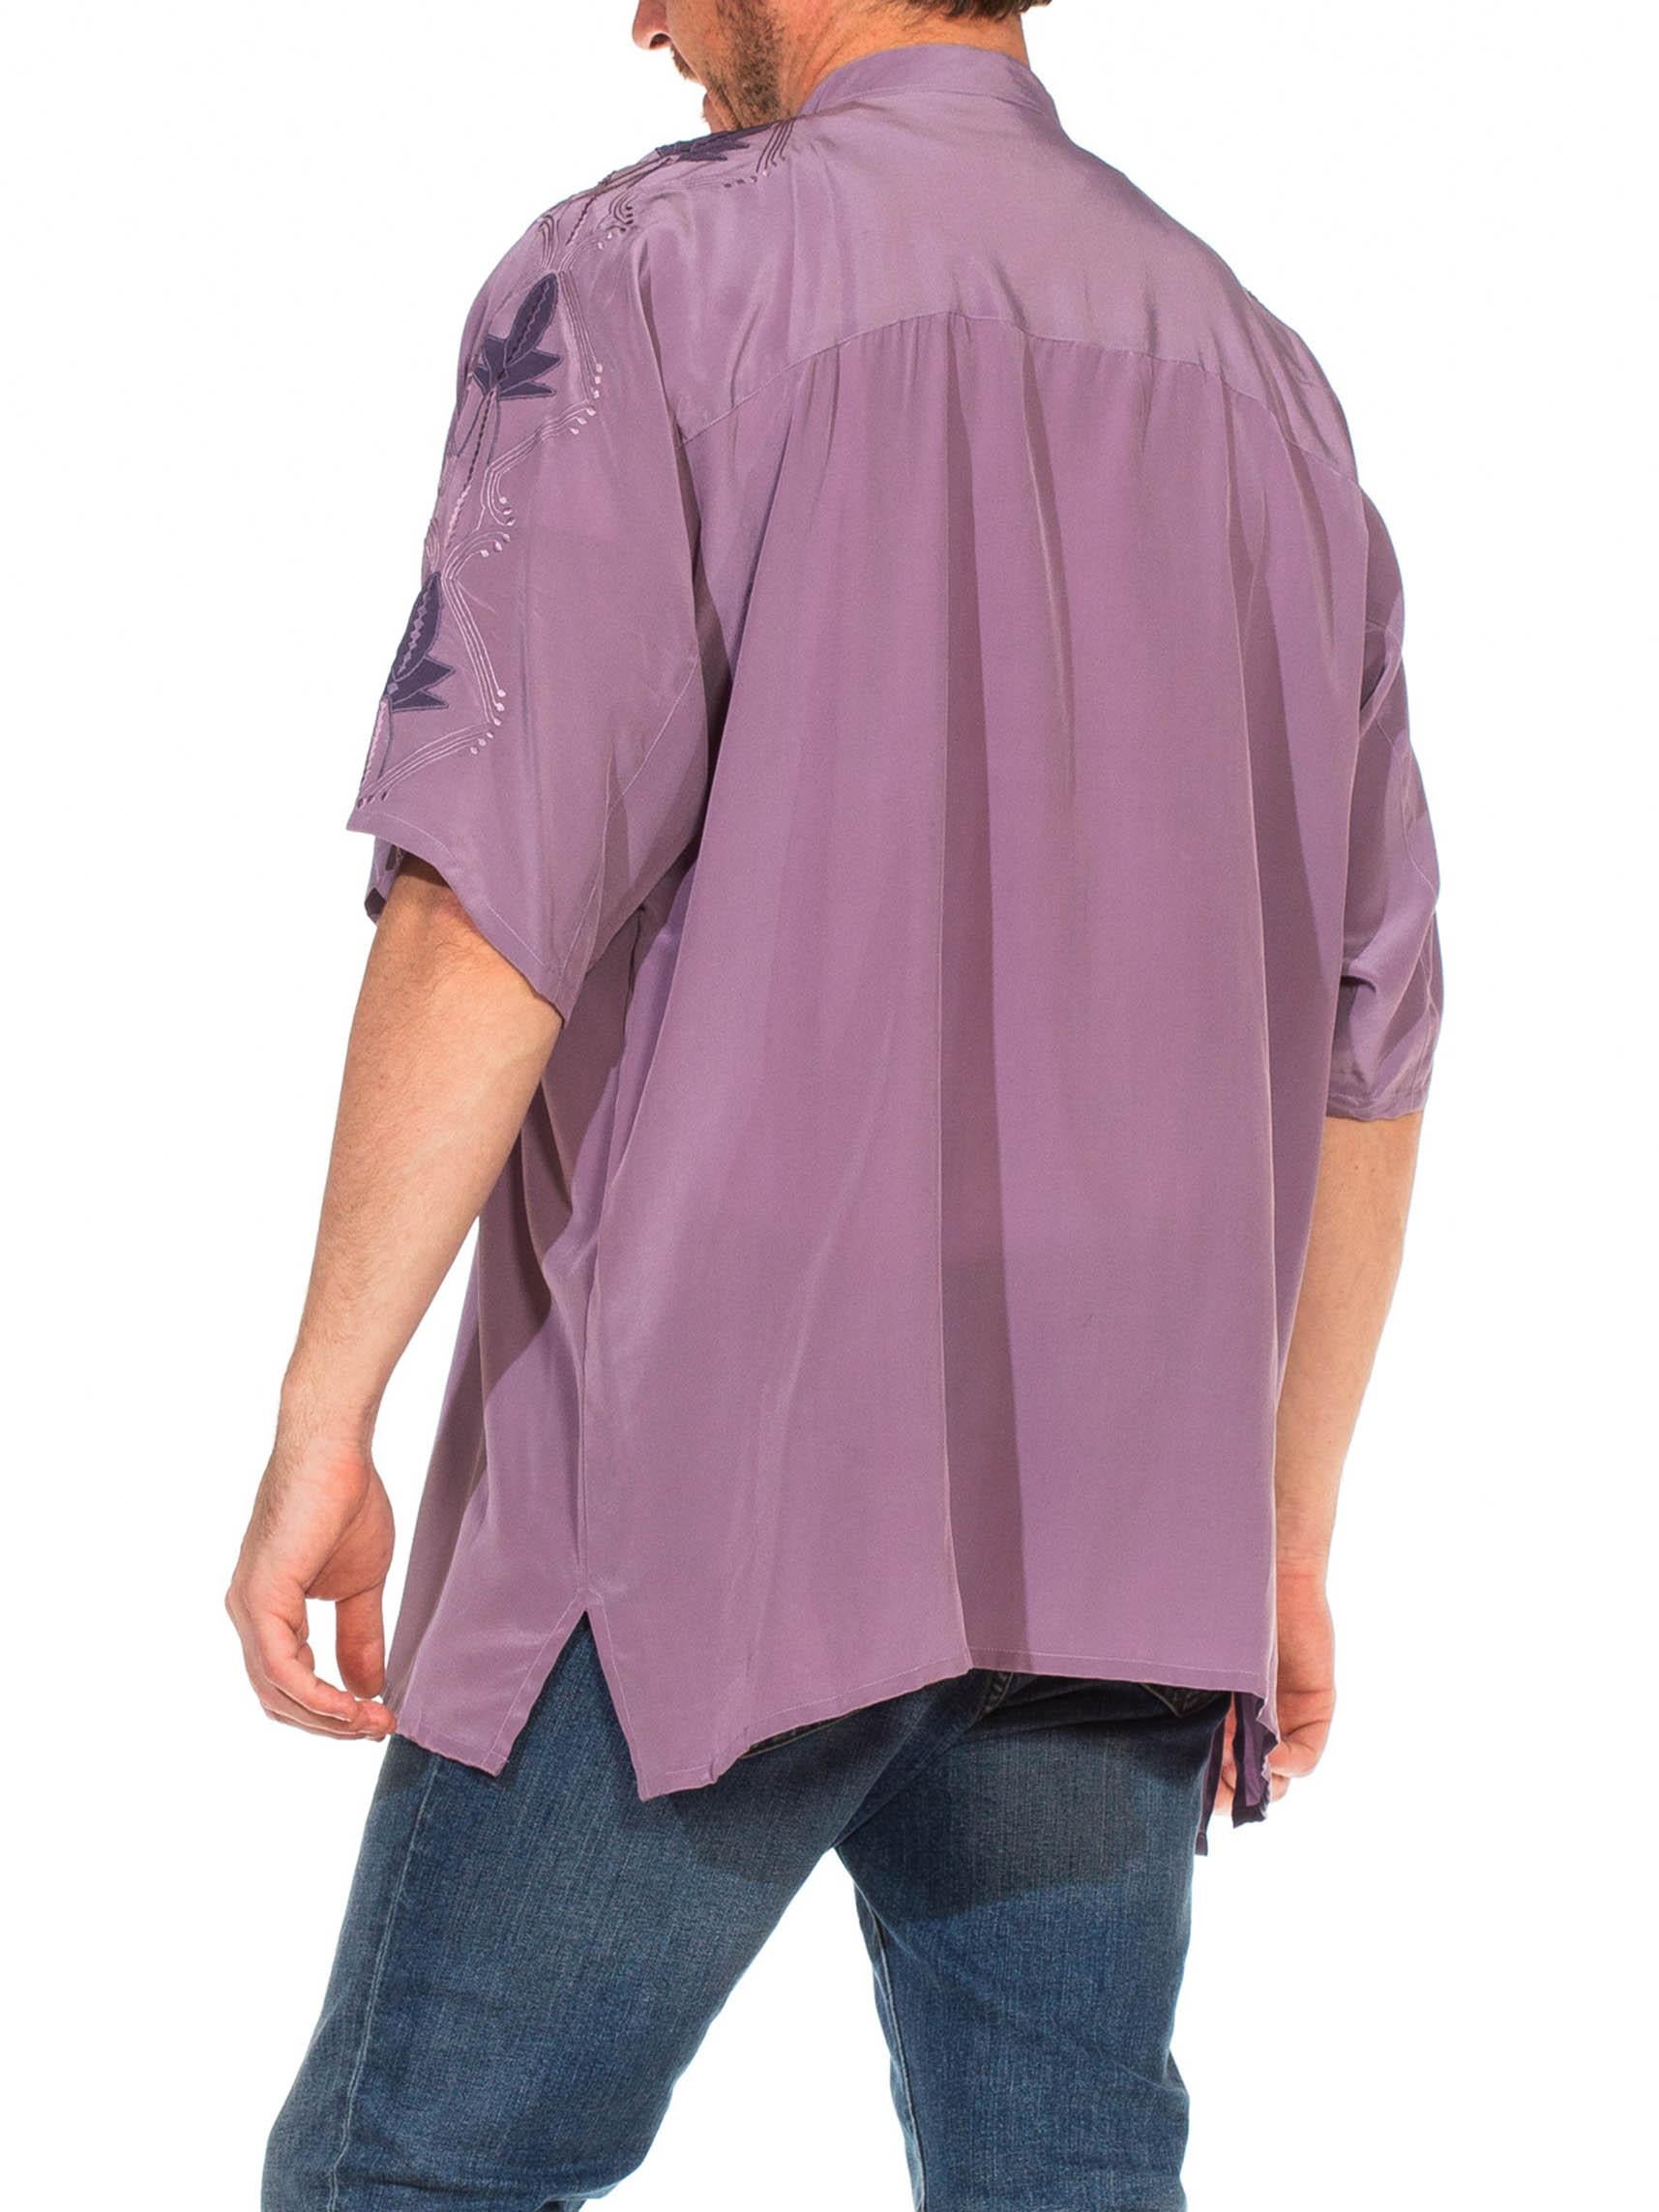 1980S Dusty Purple Hand Embroidered Silk Crepe De Chine Men's Shirt NWT 3